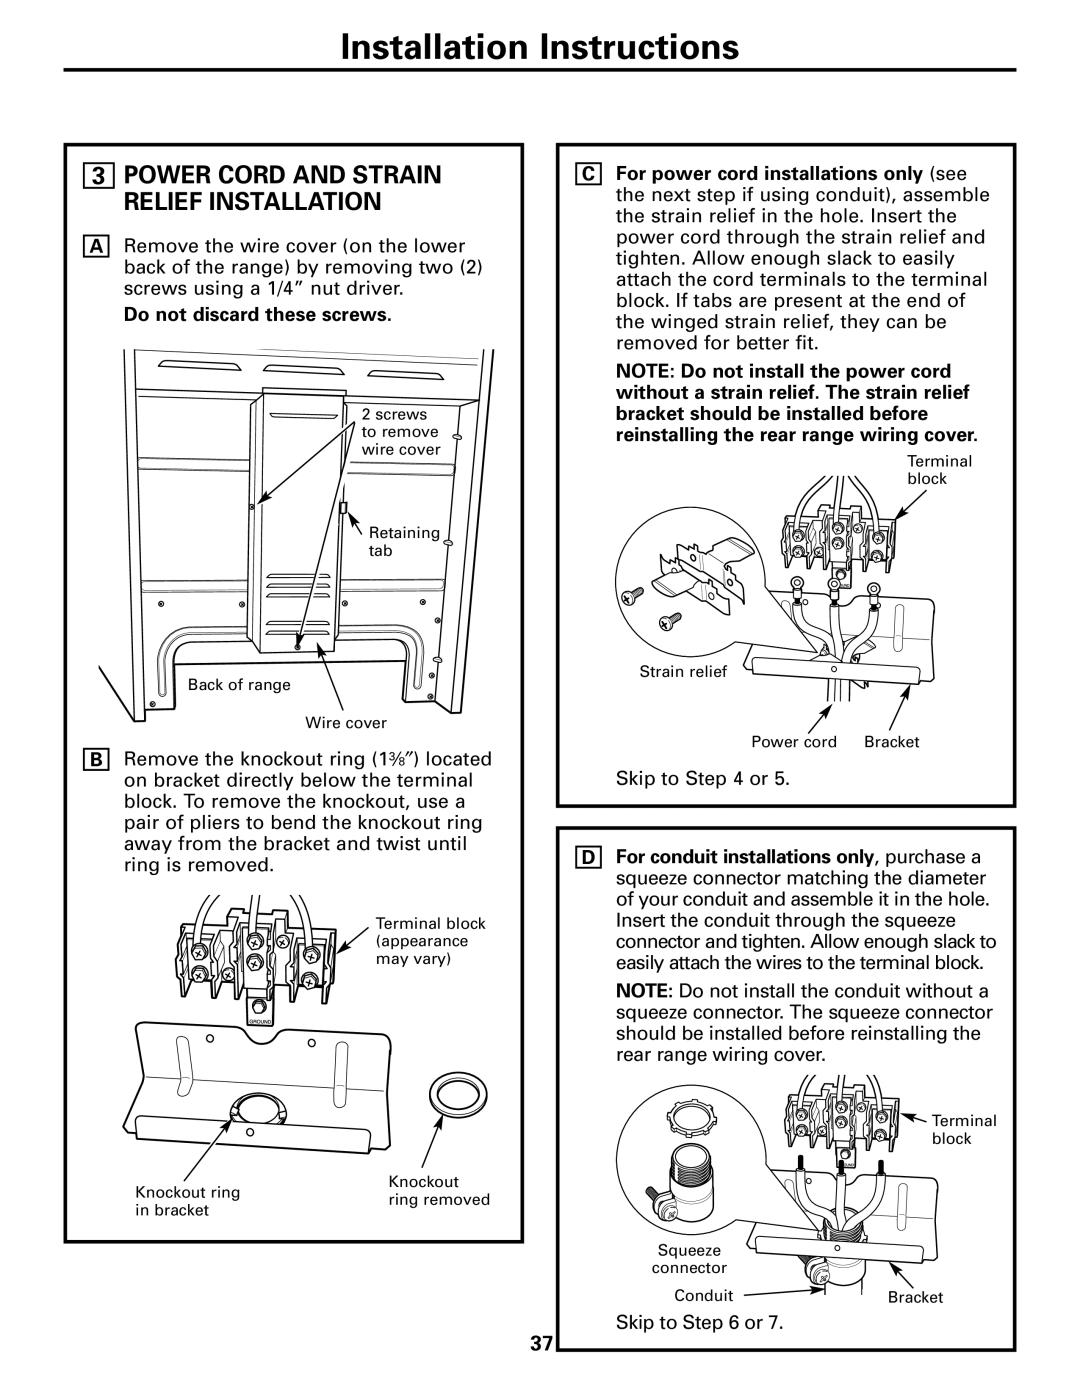 Hotpoint JBP27, JBS56 3POWER CORD AND STRAIN RELIEF INSTALLATION, Do not discard these screws, Installation Instructions 